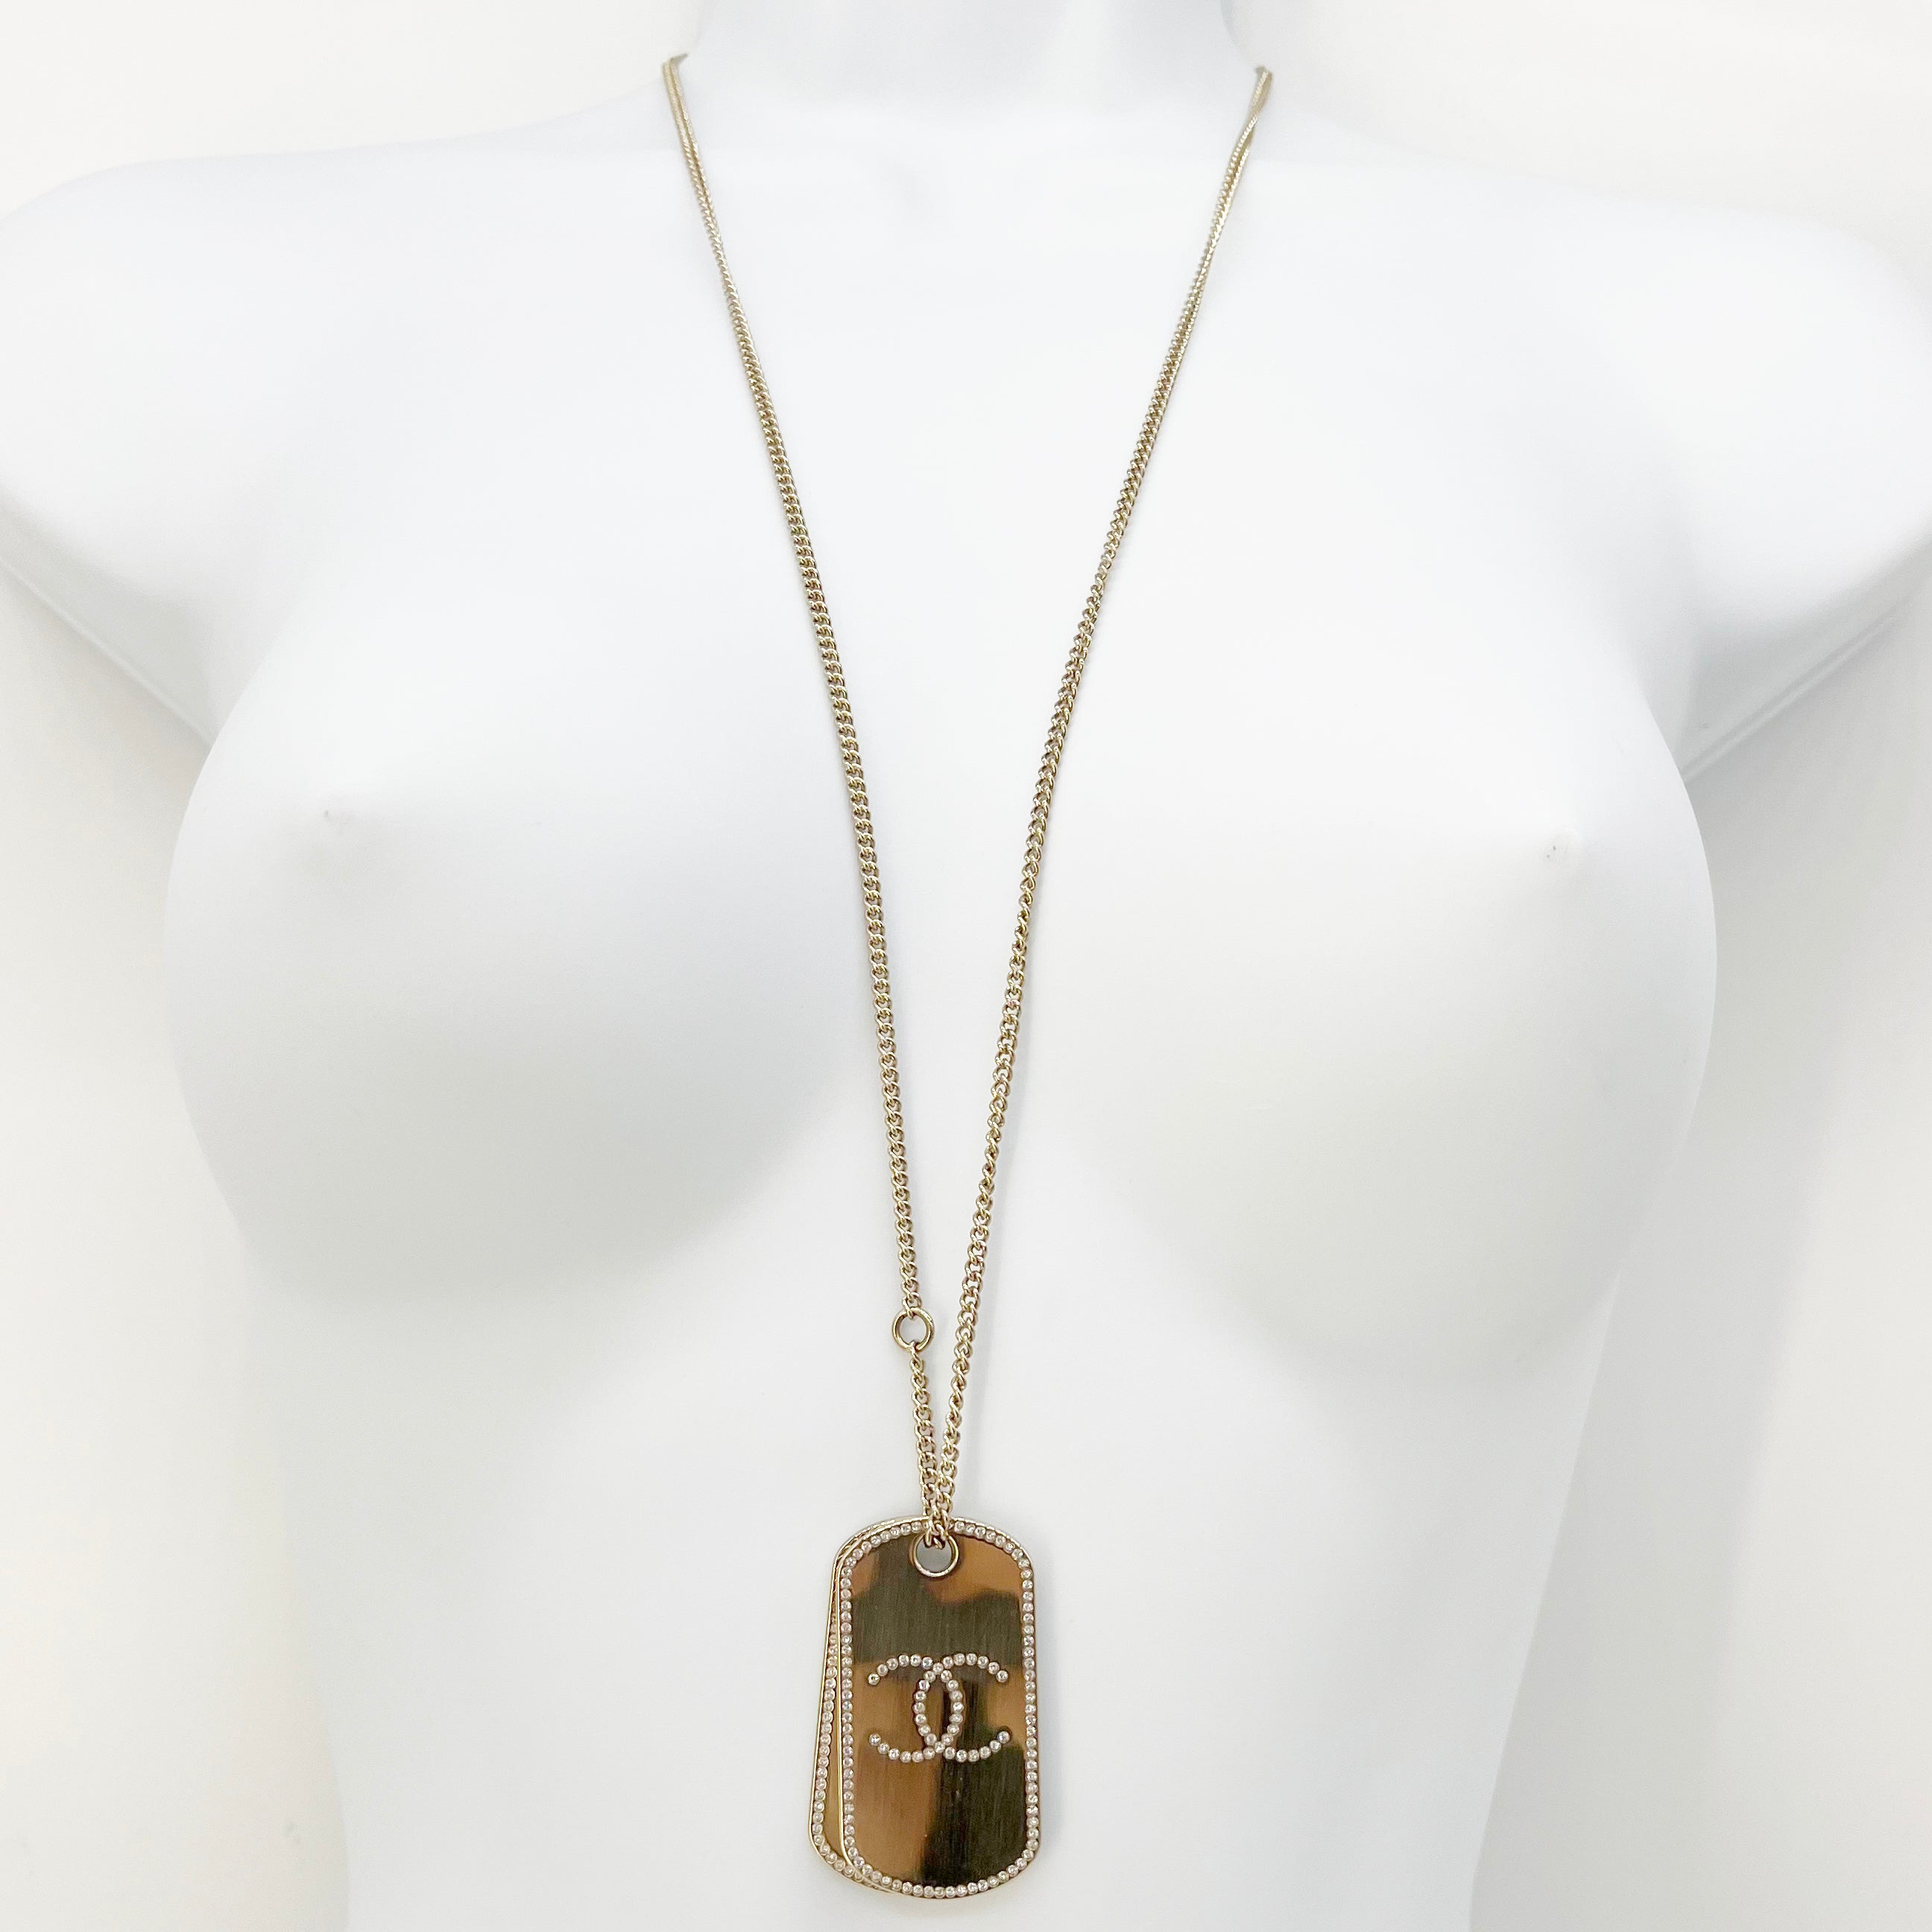 Guaranteed Authentic Chanel Gold Plated Metal with Crystal CC/Chanel Dog Tag Charm Necklace Gold 17”